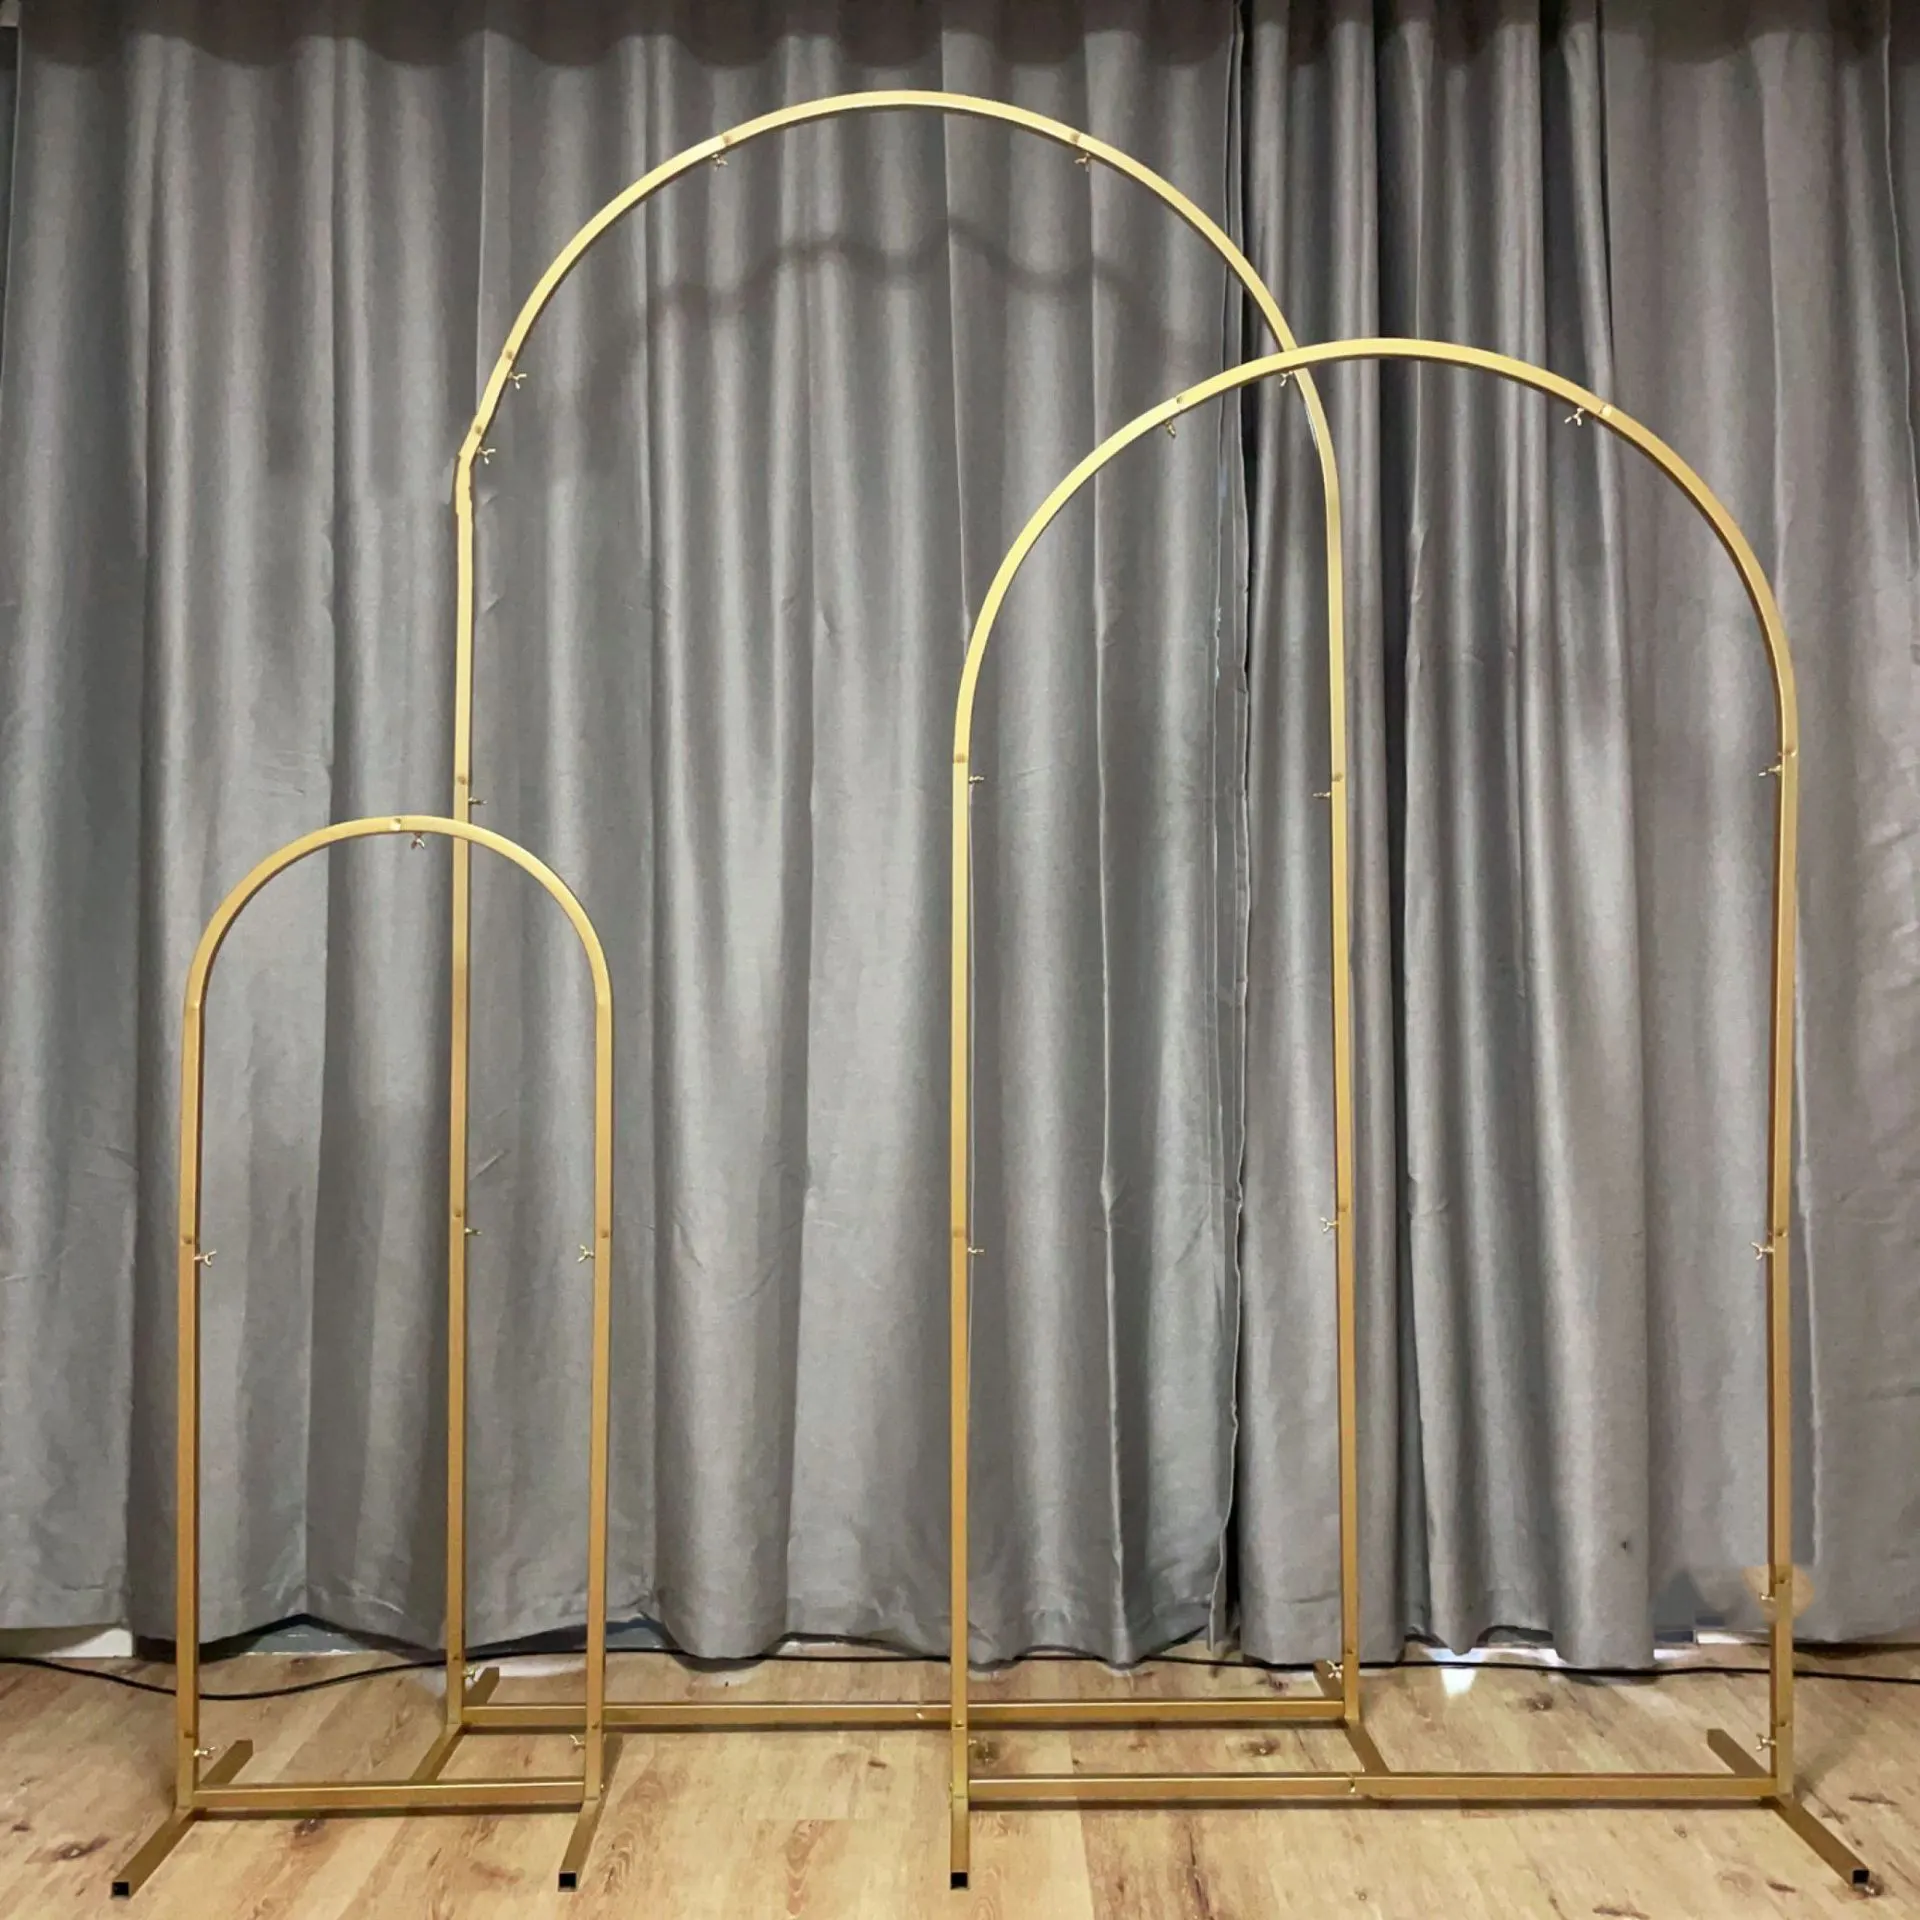 Wedding decoration Supplies Decoration 6ft 6.6ft 7.2ft Metal Arched Balloon Frame Backdrop Stand Gold Floral Wedding Arch